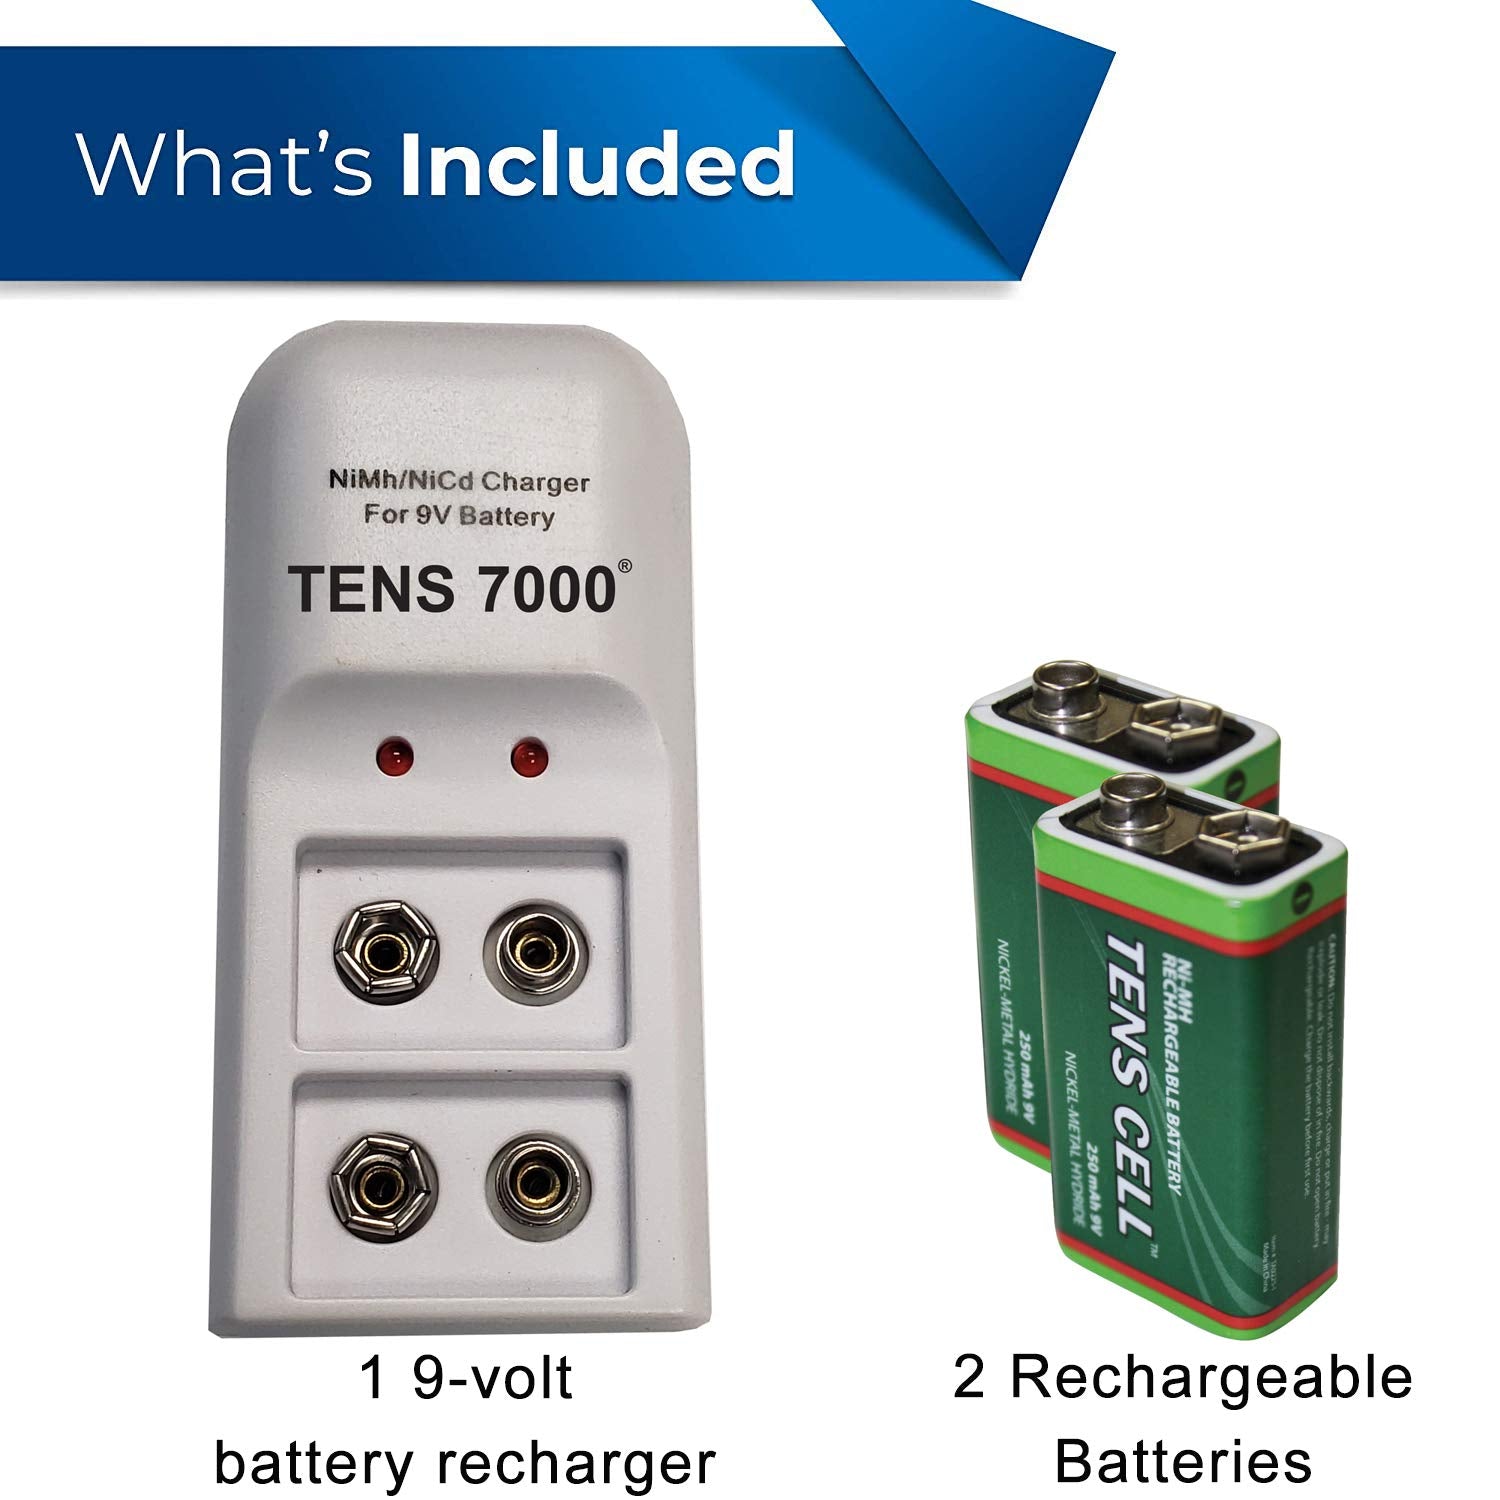 TENS 7000 Official Rechargeable 9v Batteries Kit